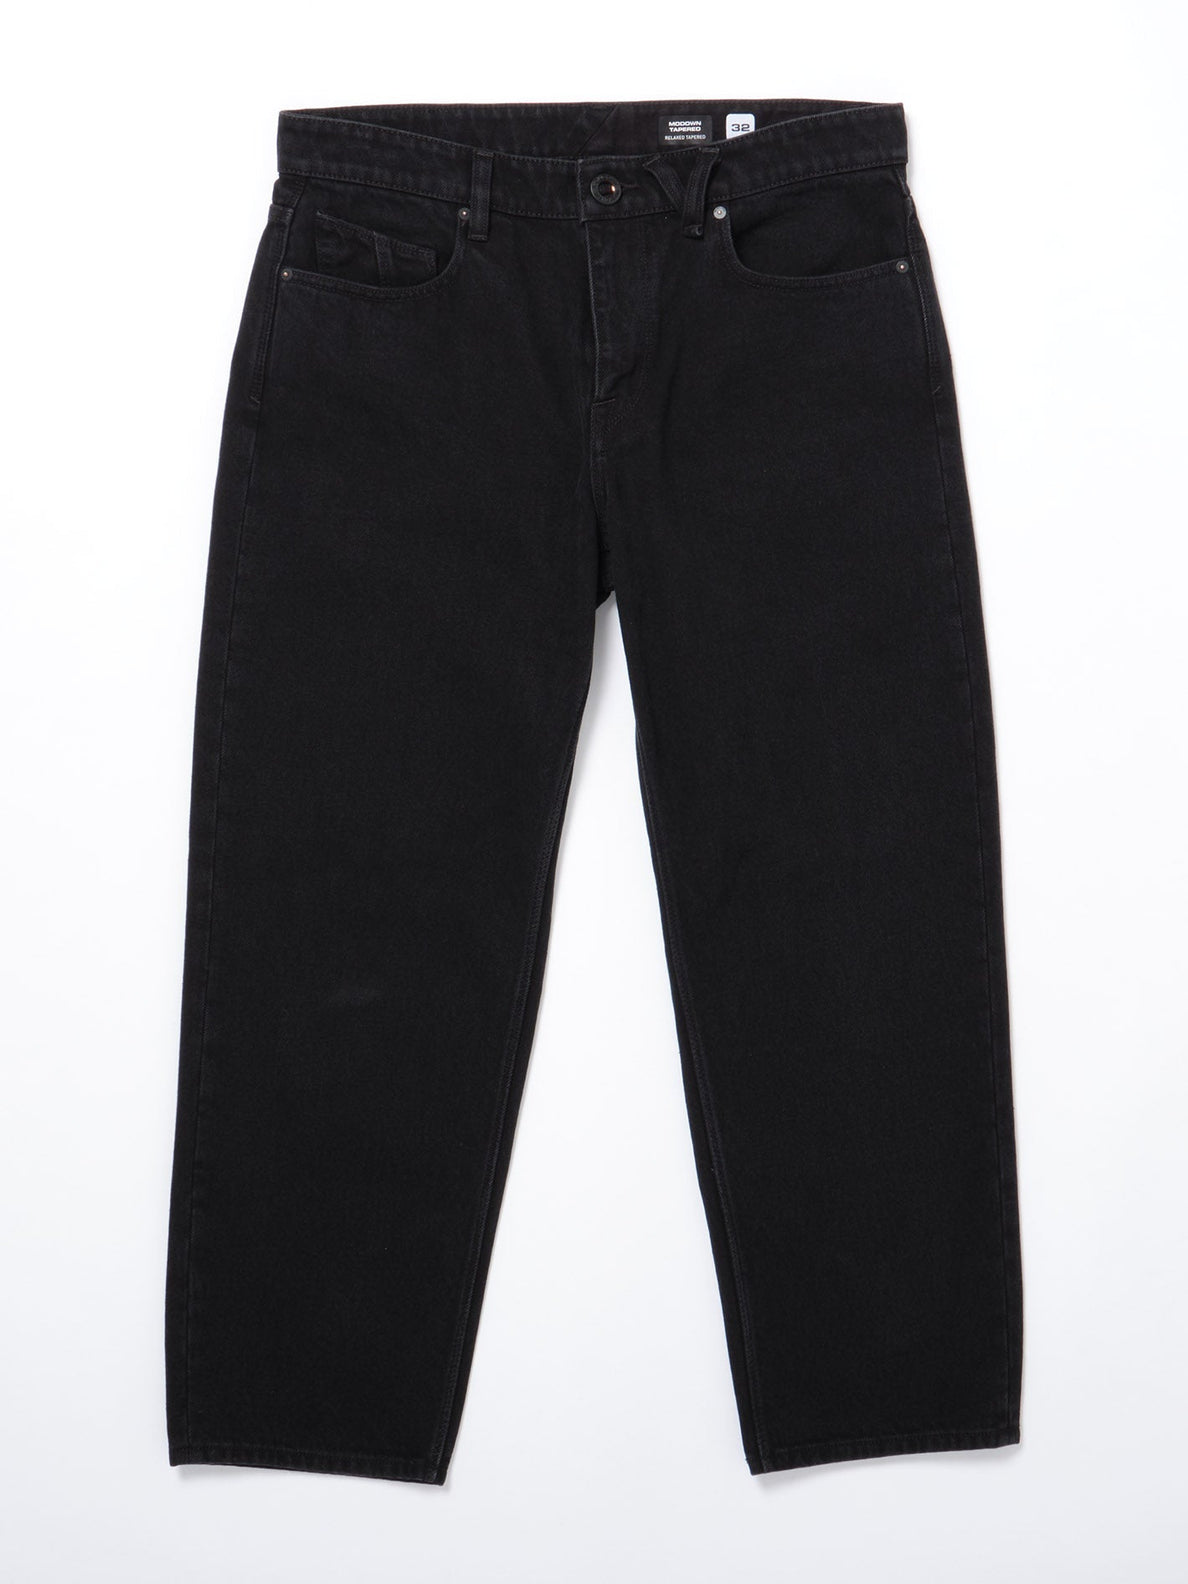 Modown Tapered Jeans - BLACK (A1932102_BLK) [3]